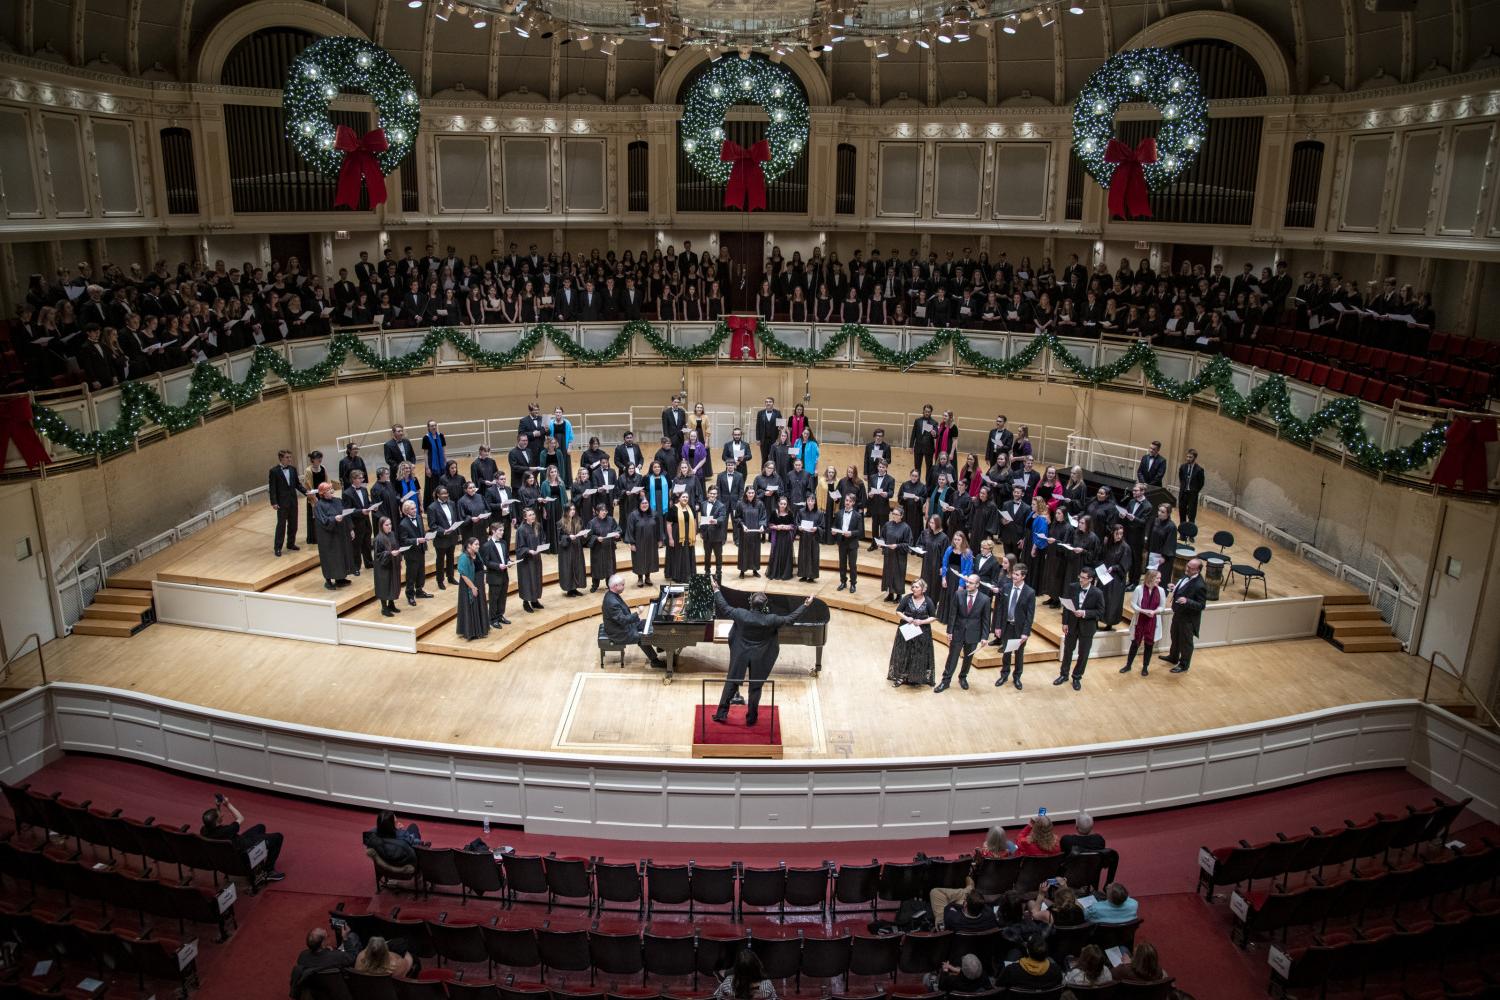 The <a href='http://qqt.daves-studio.com'>bv伟德ios下载</a> Choir performs in the Chicago Symphony Hall.